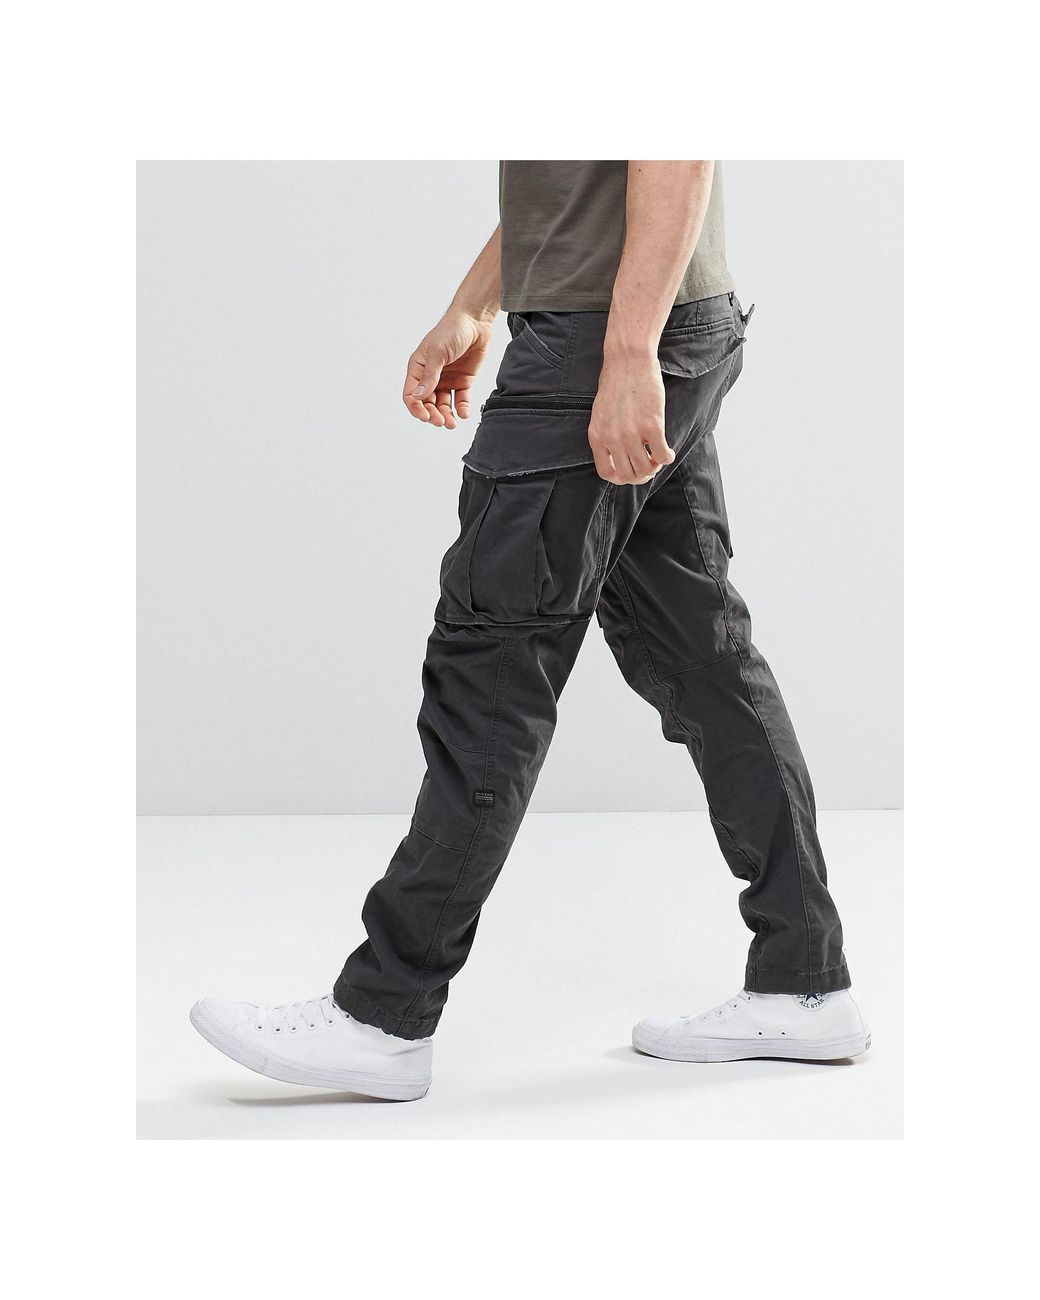 Discover 84+ g star raw cargo trousers latest - in.cdgdbentre